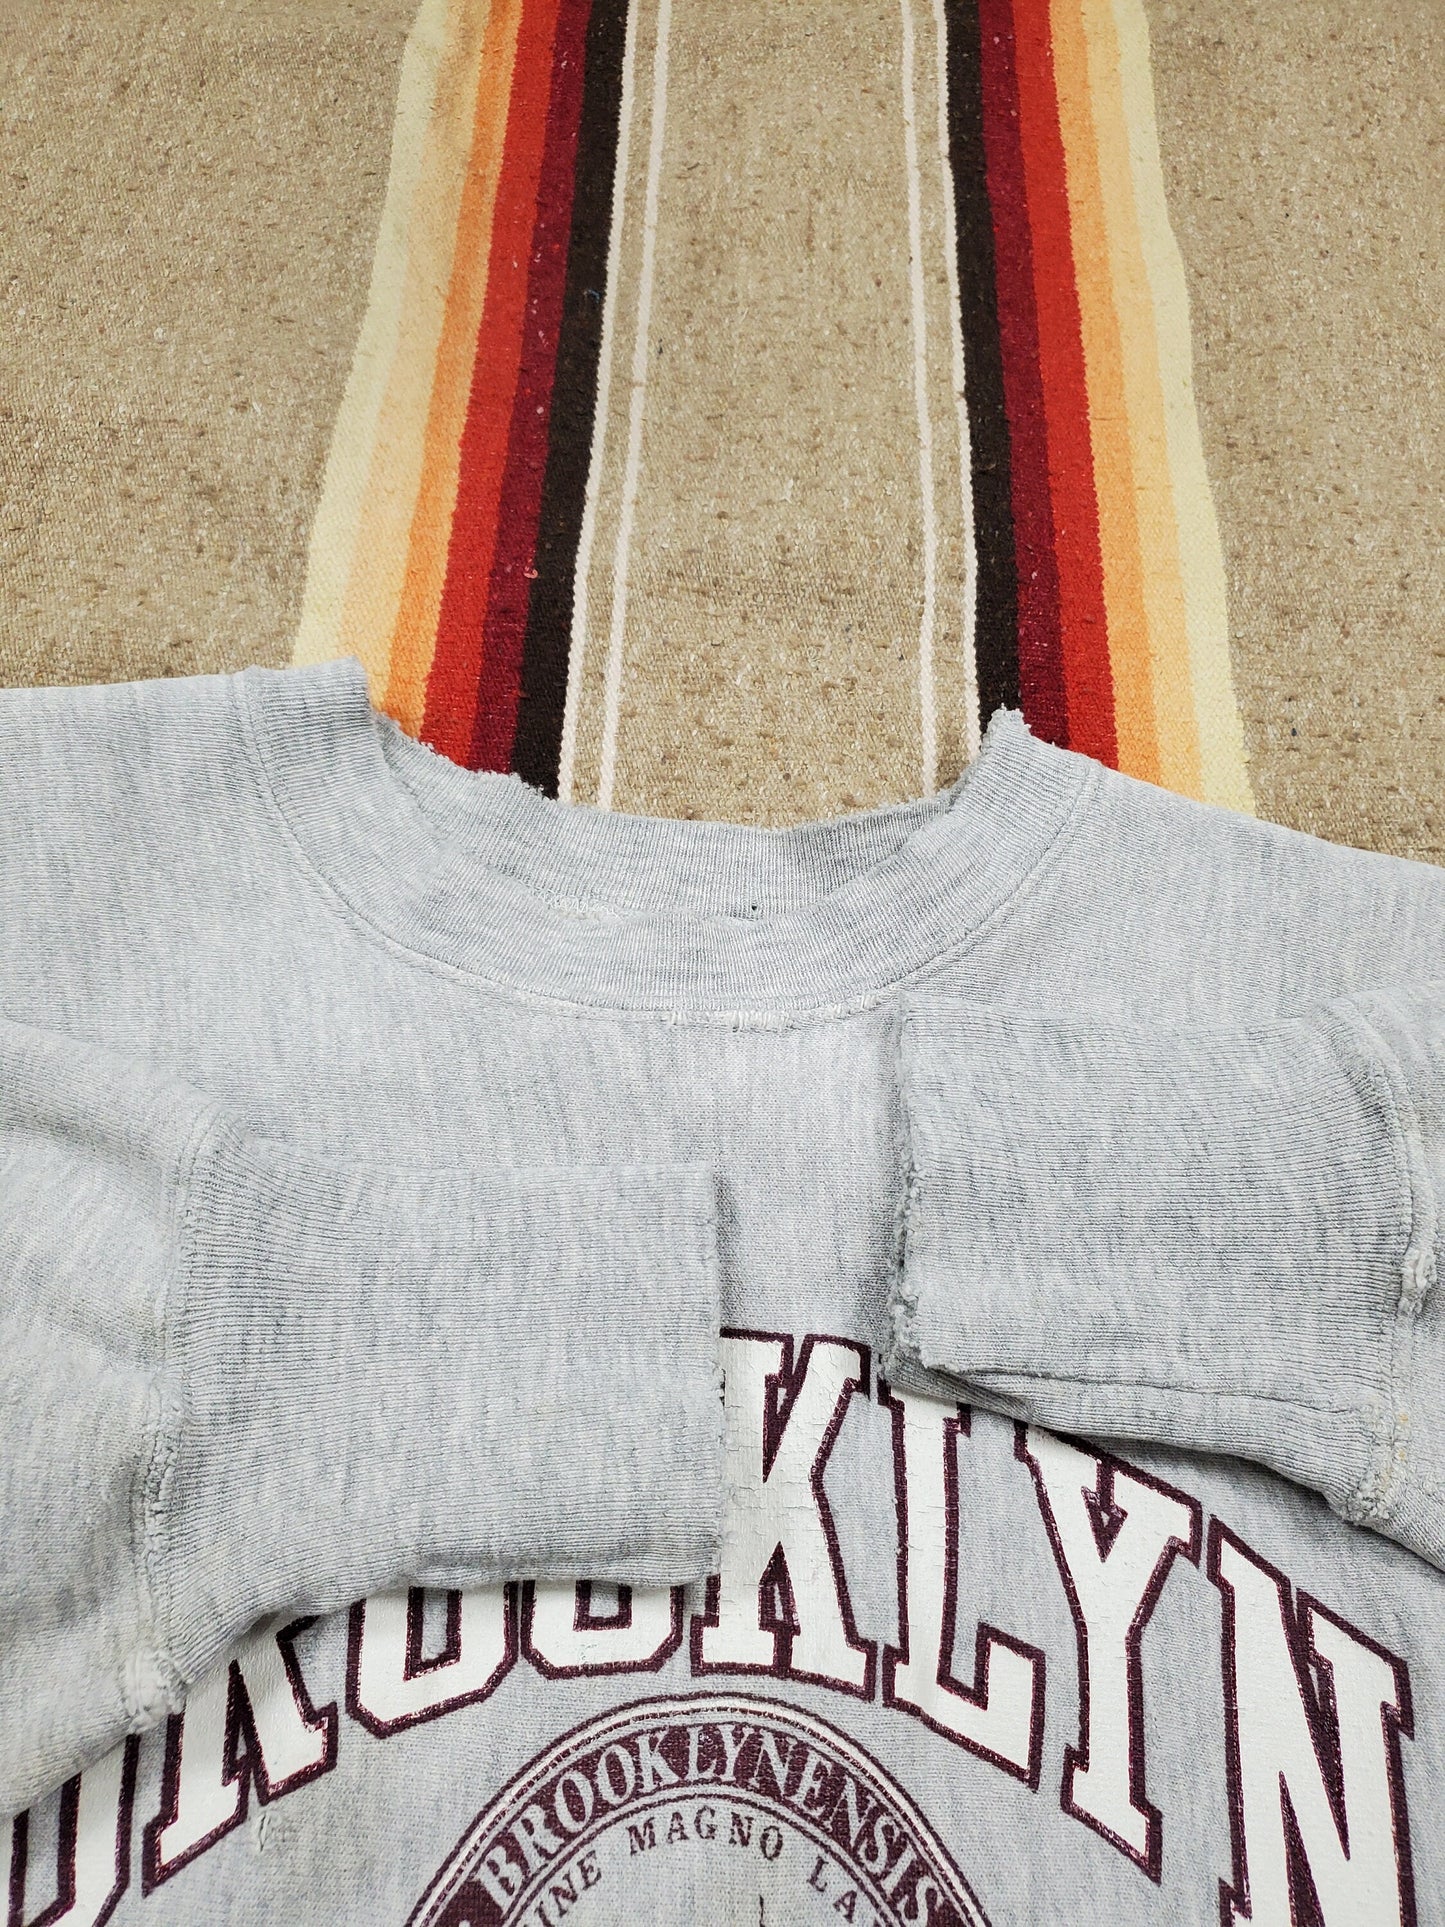 1990s Champion Brooklyn College Reverse Weave Sweatshirt Made in USA Size L